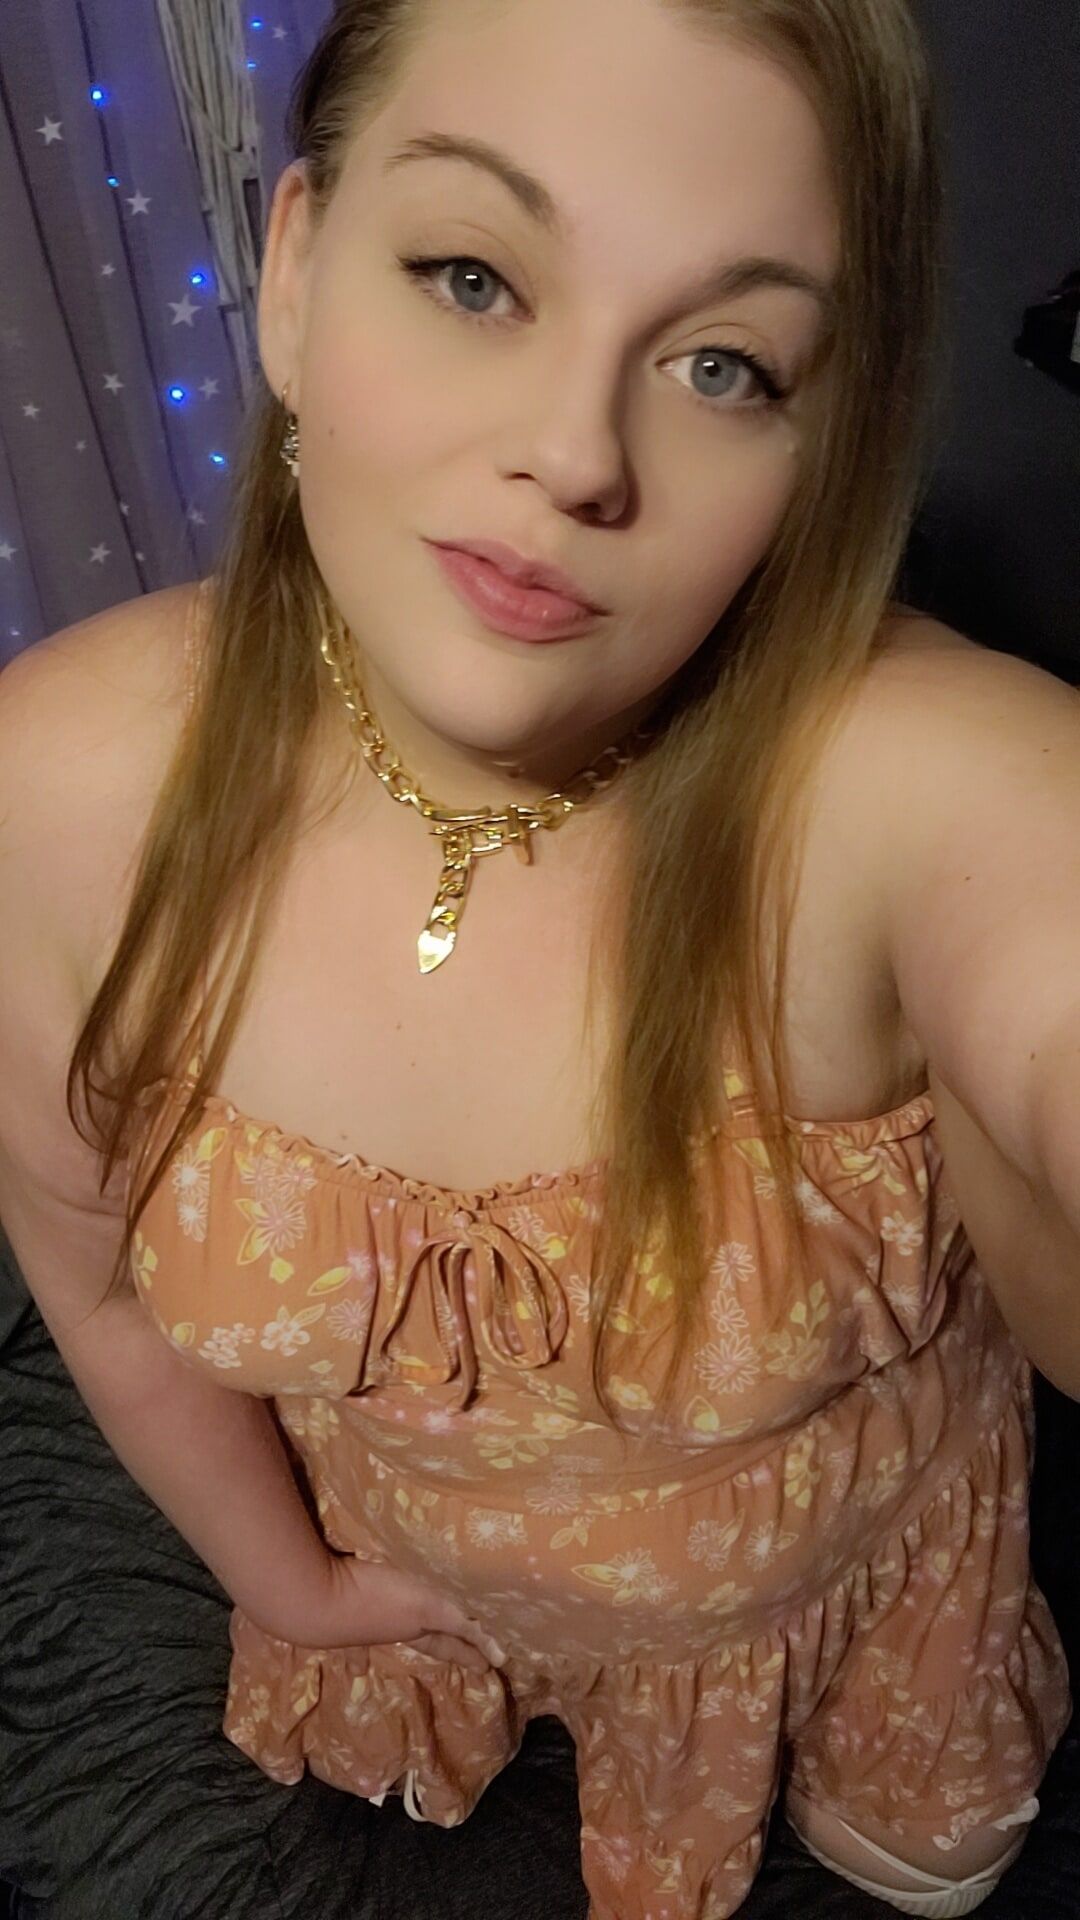 Cute bbw in dress and white fishnet knee highs #3